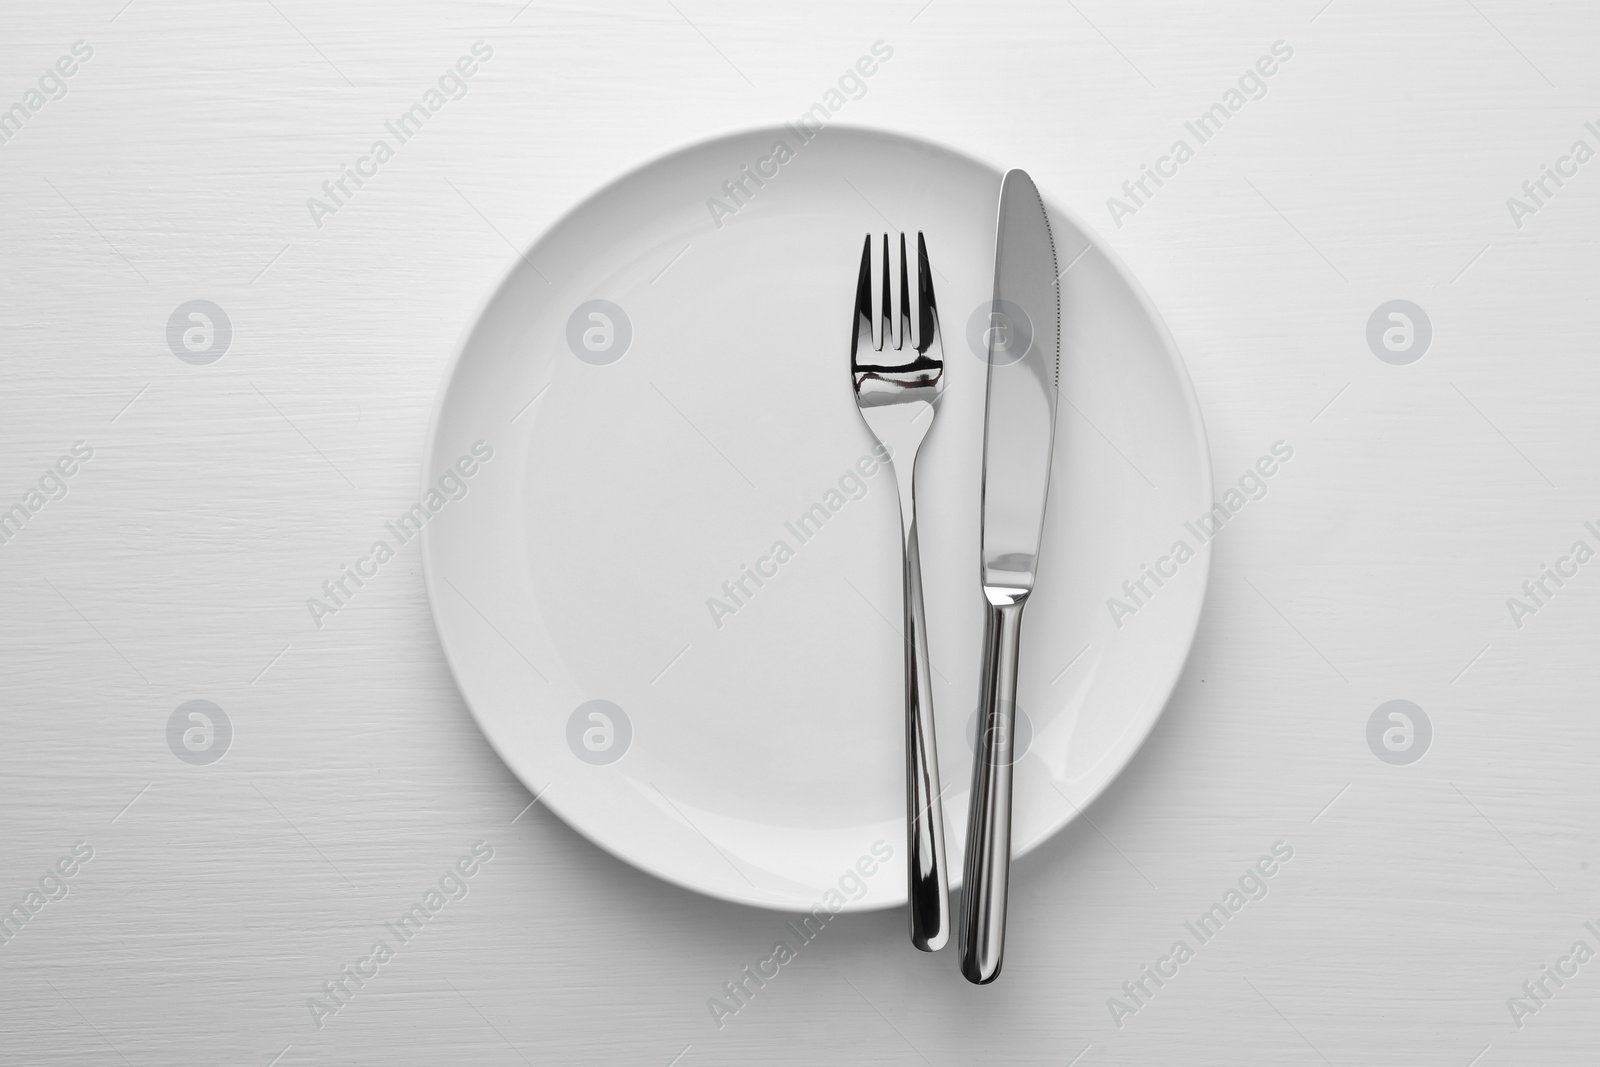 Photo of Clean plate, fork and knife on white table, top view